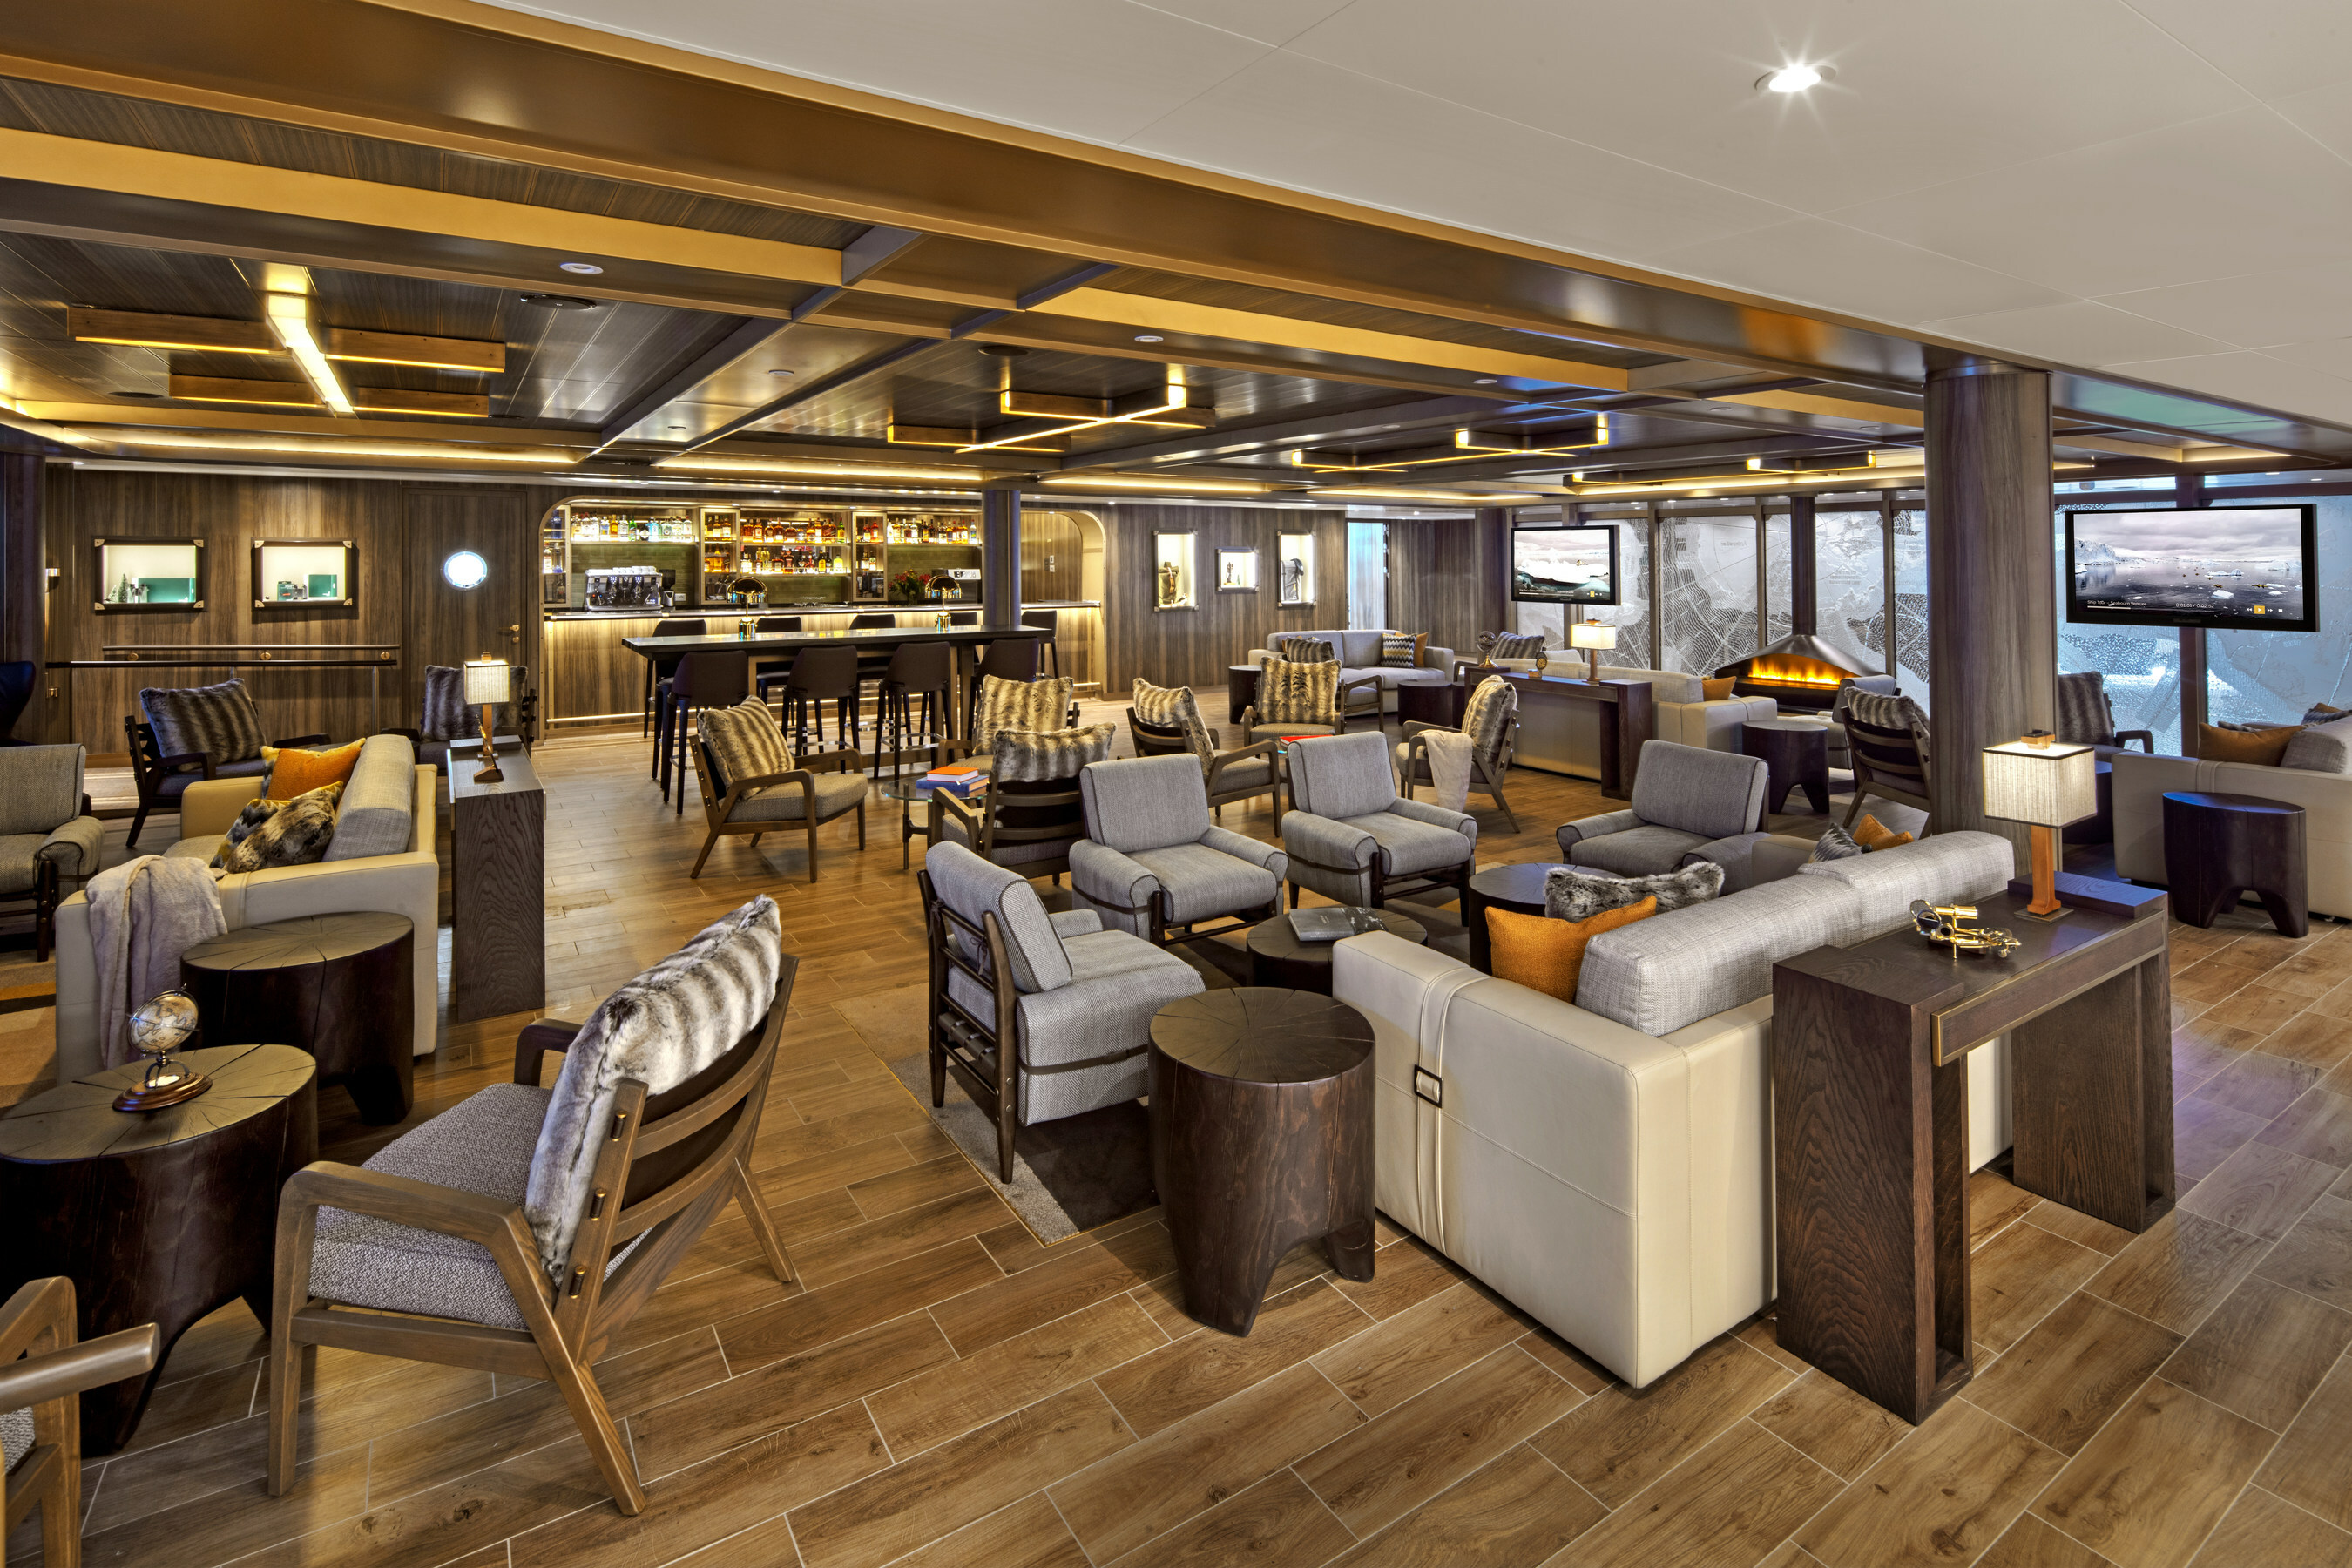 New Seabourn Pursuit to offer Unprecedented Elegance And Space - Expedition Lounge (Image at LateCruiseNews.com - July 2023)